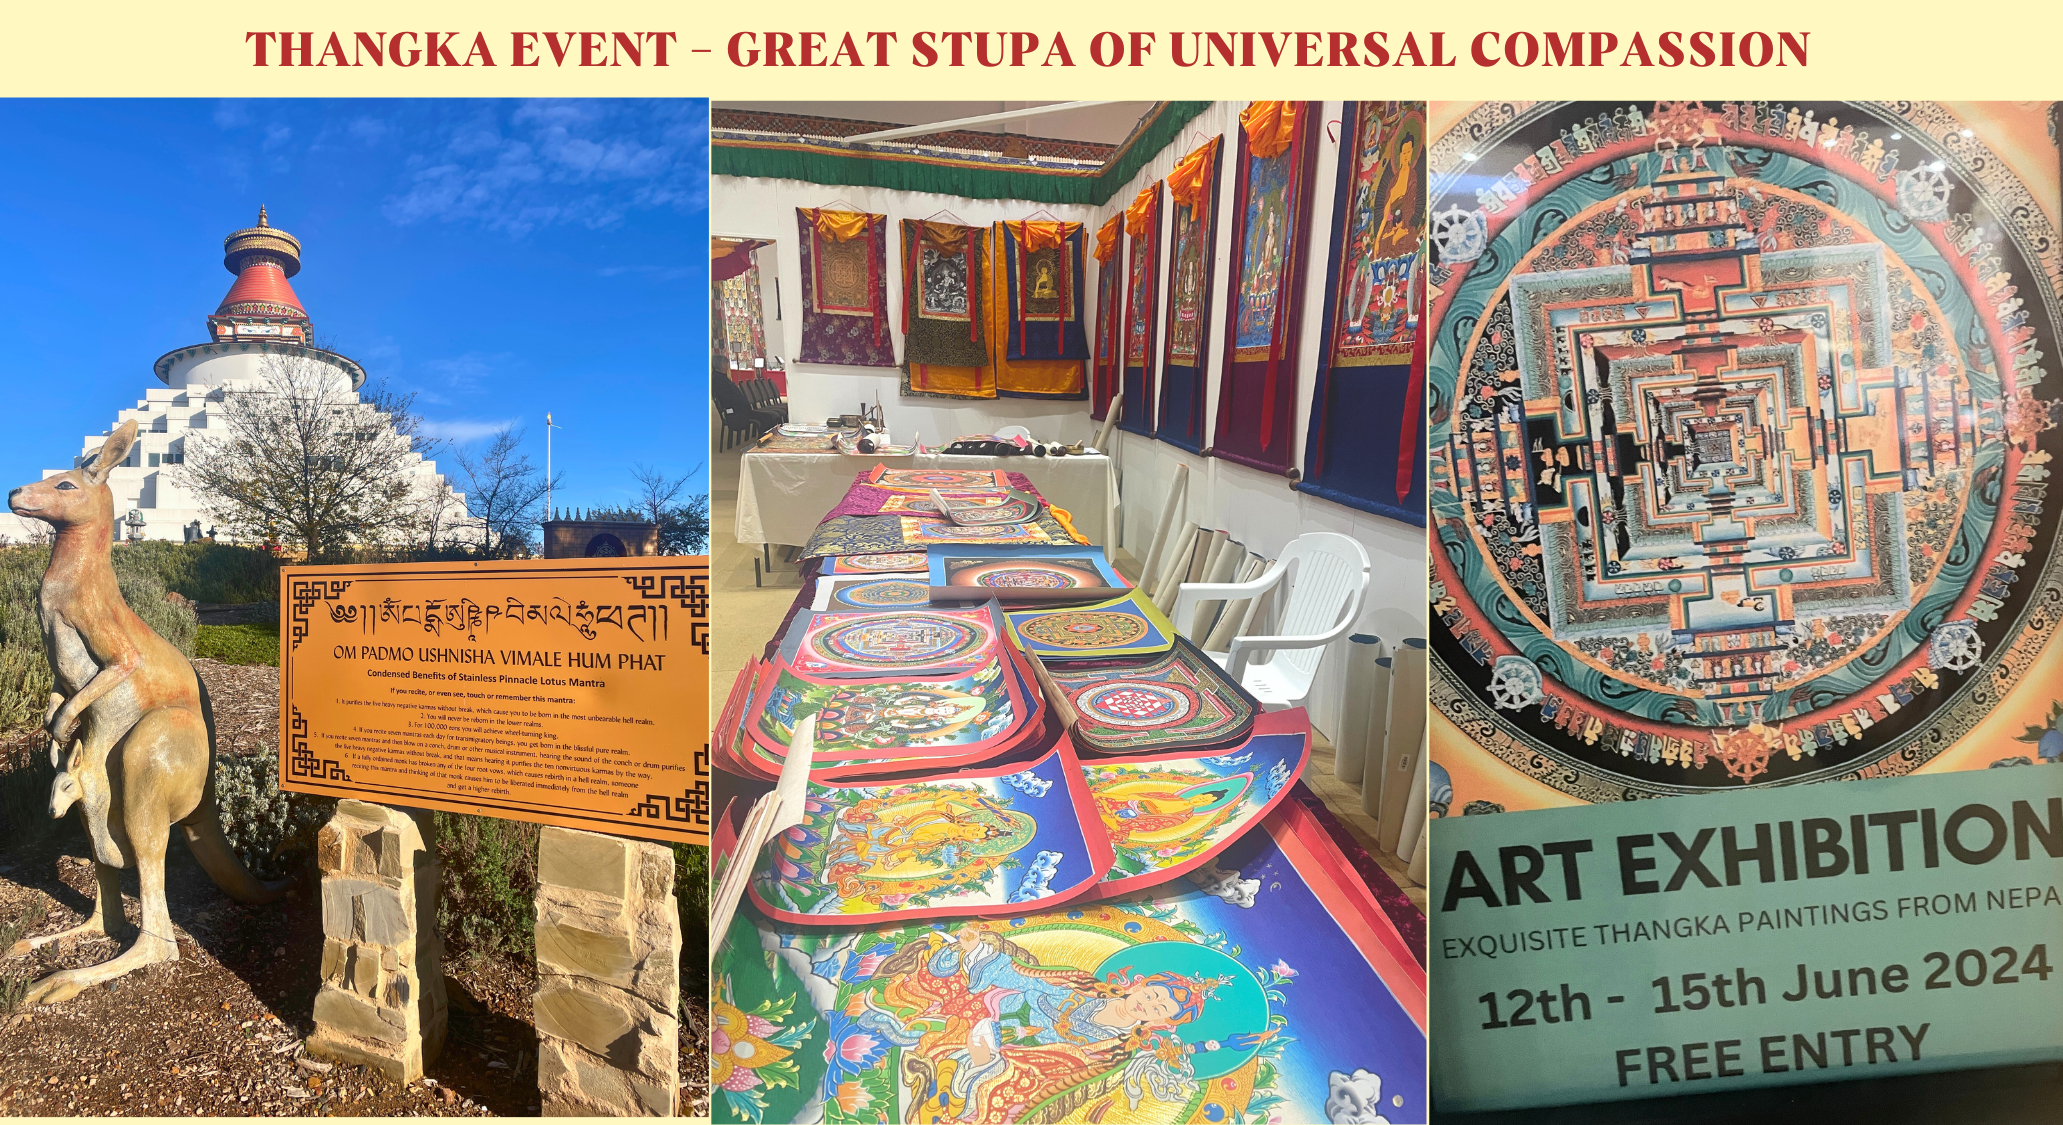 Great Stupa Compassion Thangka exhibition show